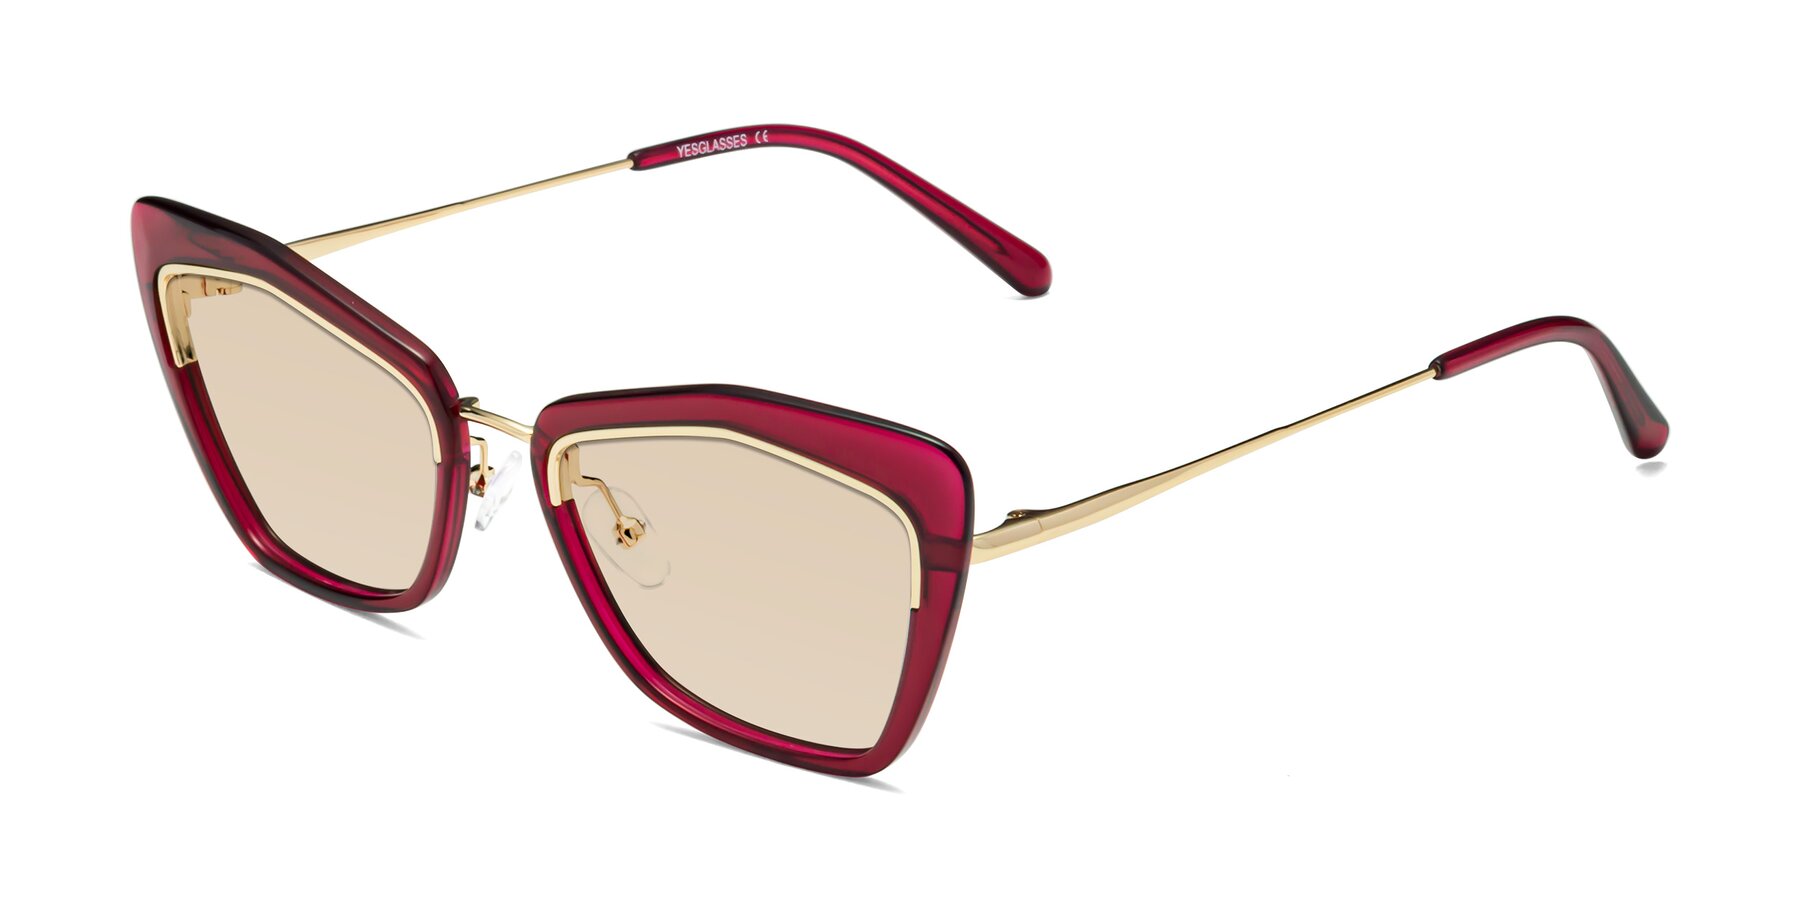 Angle of Lasso in Wine with Light Brown Tinted Lenses